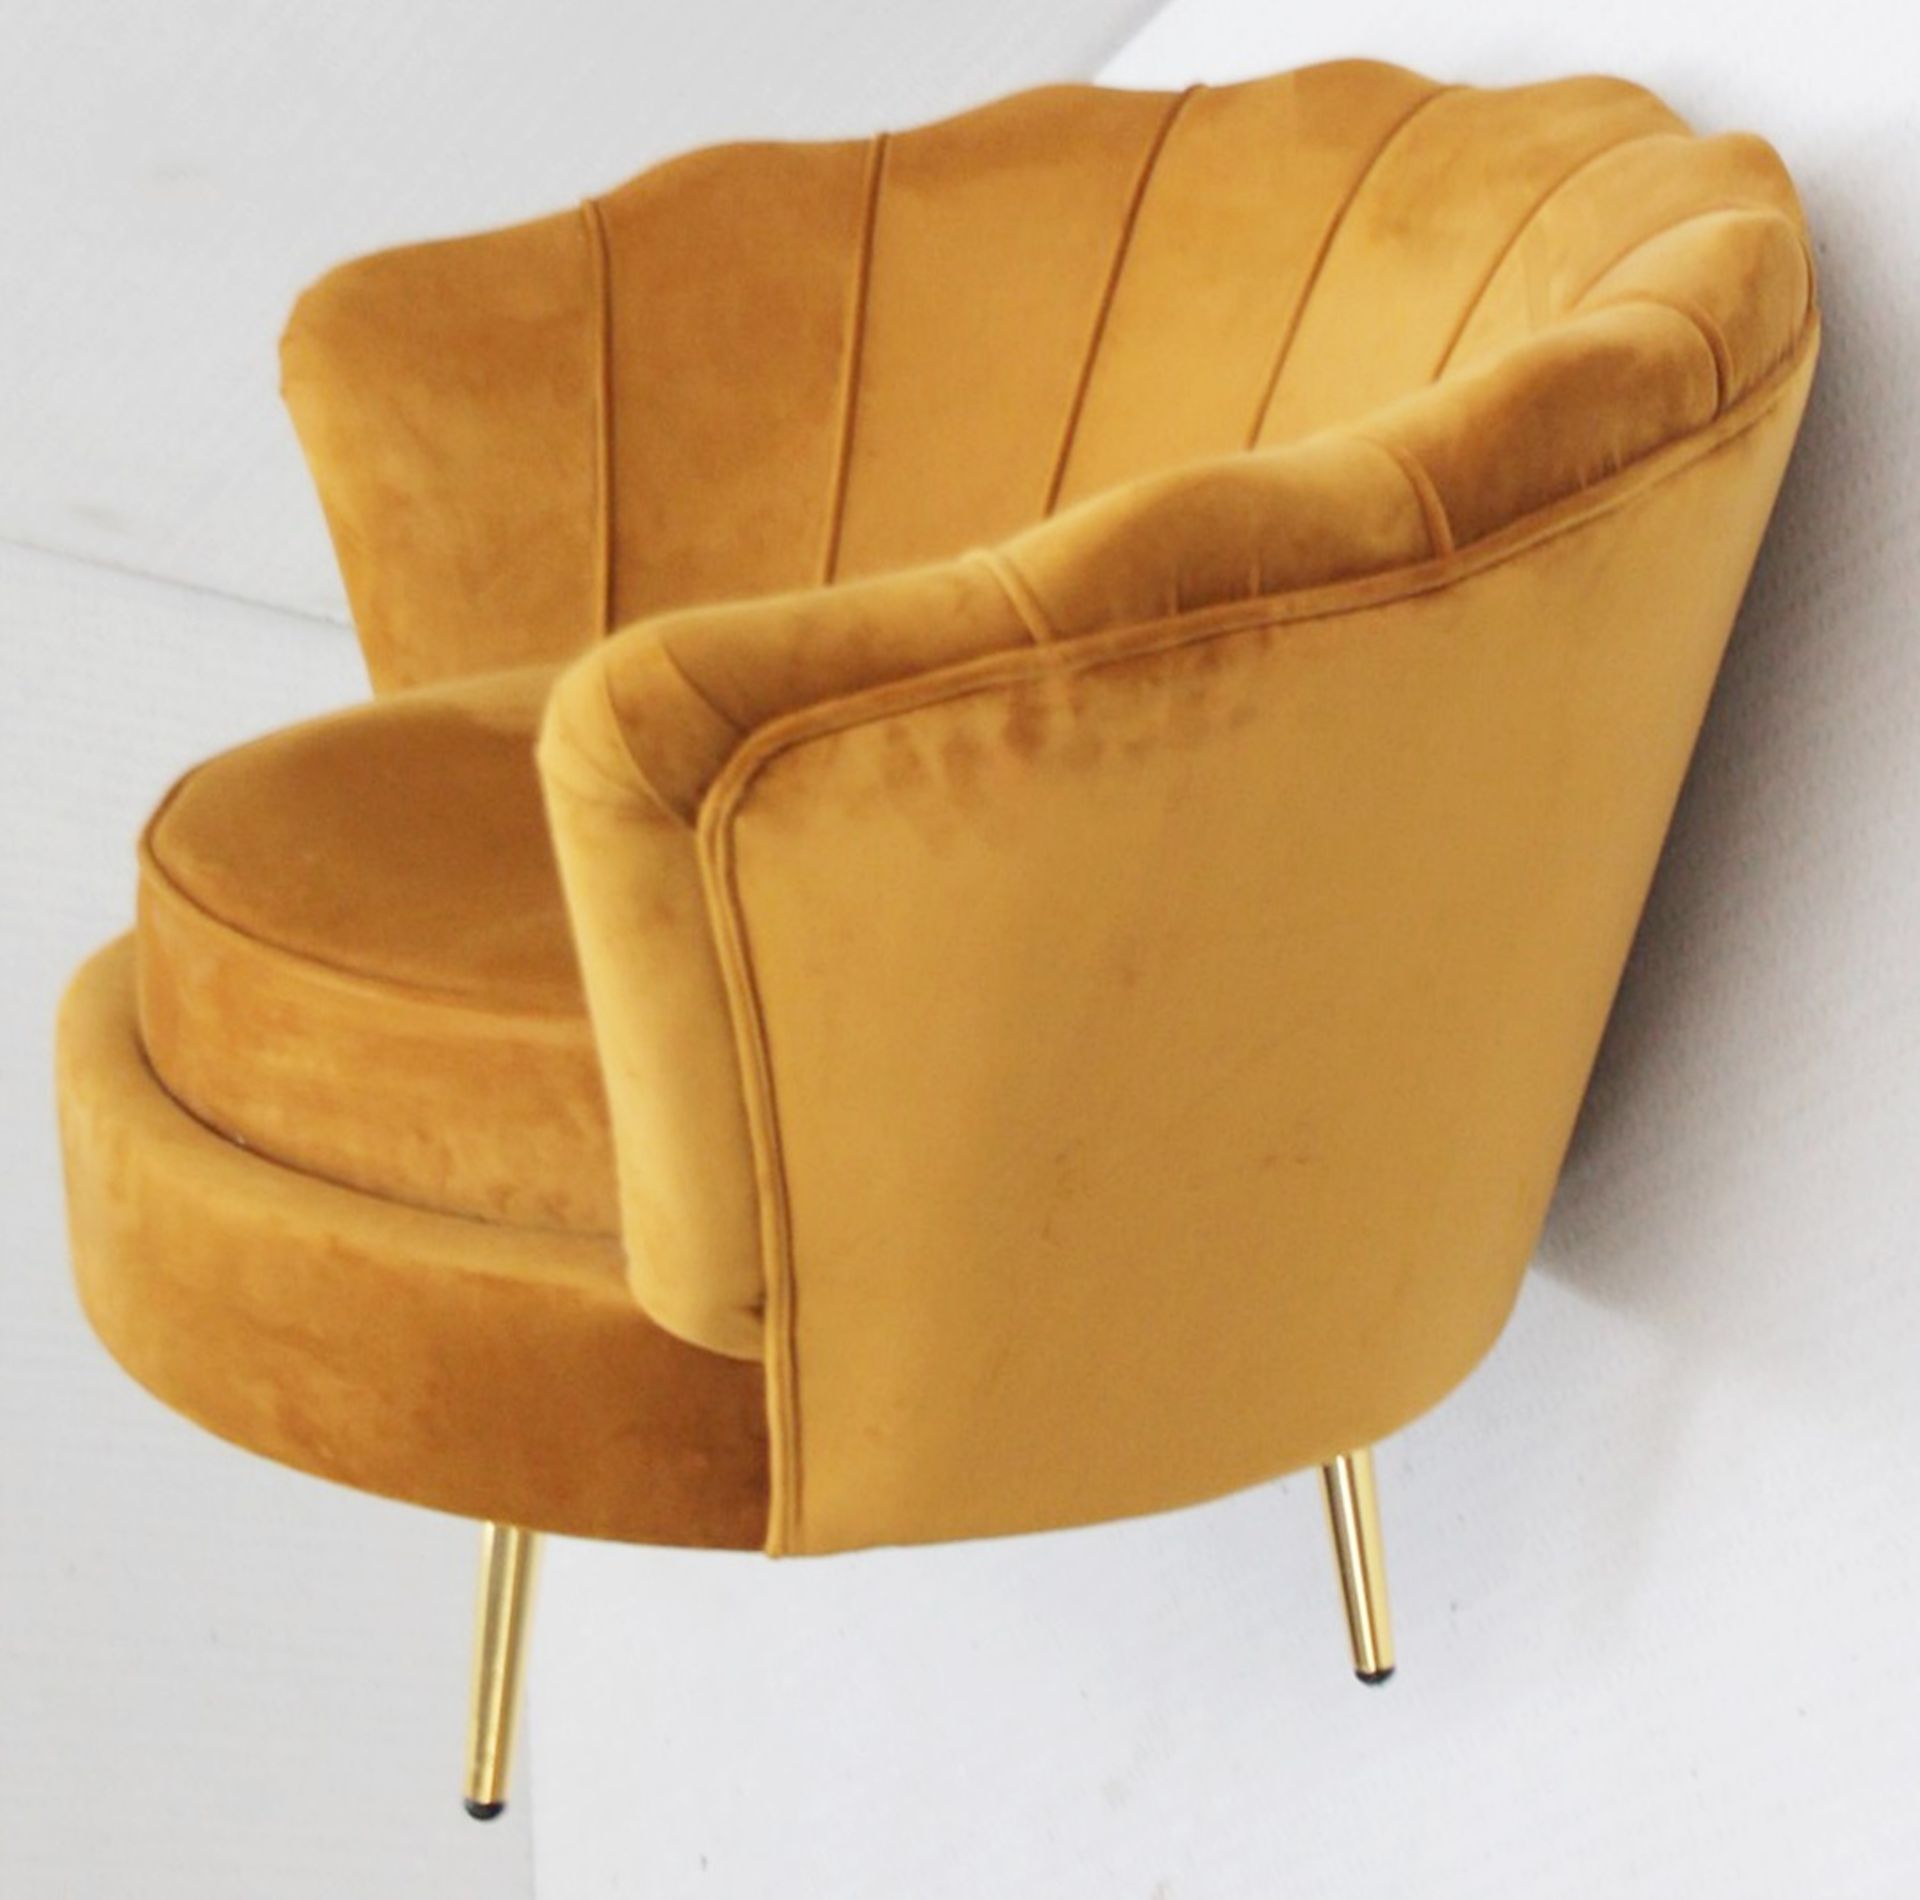 1 x Velvet Upholsted Tub Chair In Ochre Yellow - Recently Removed From A Designer Bridal - Image 4 of 7